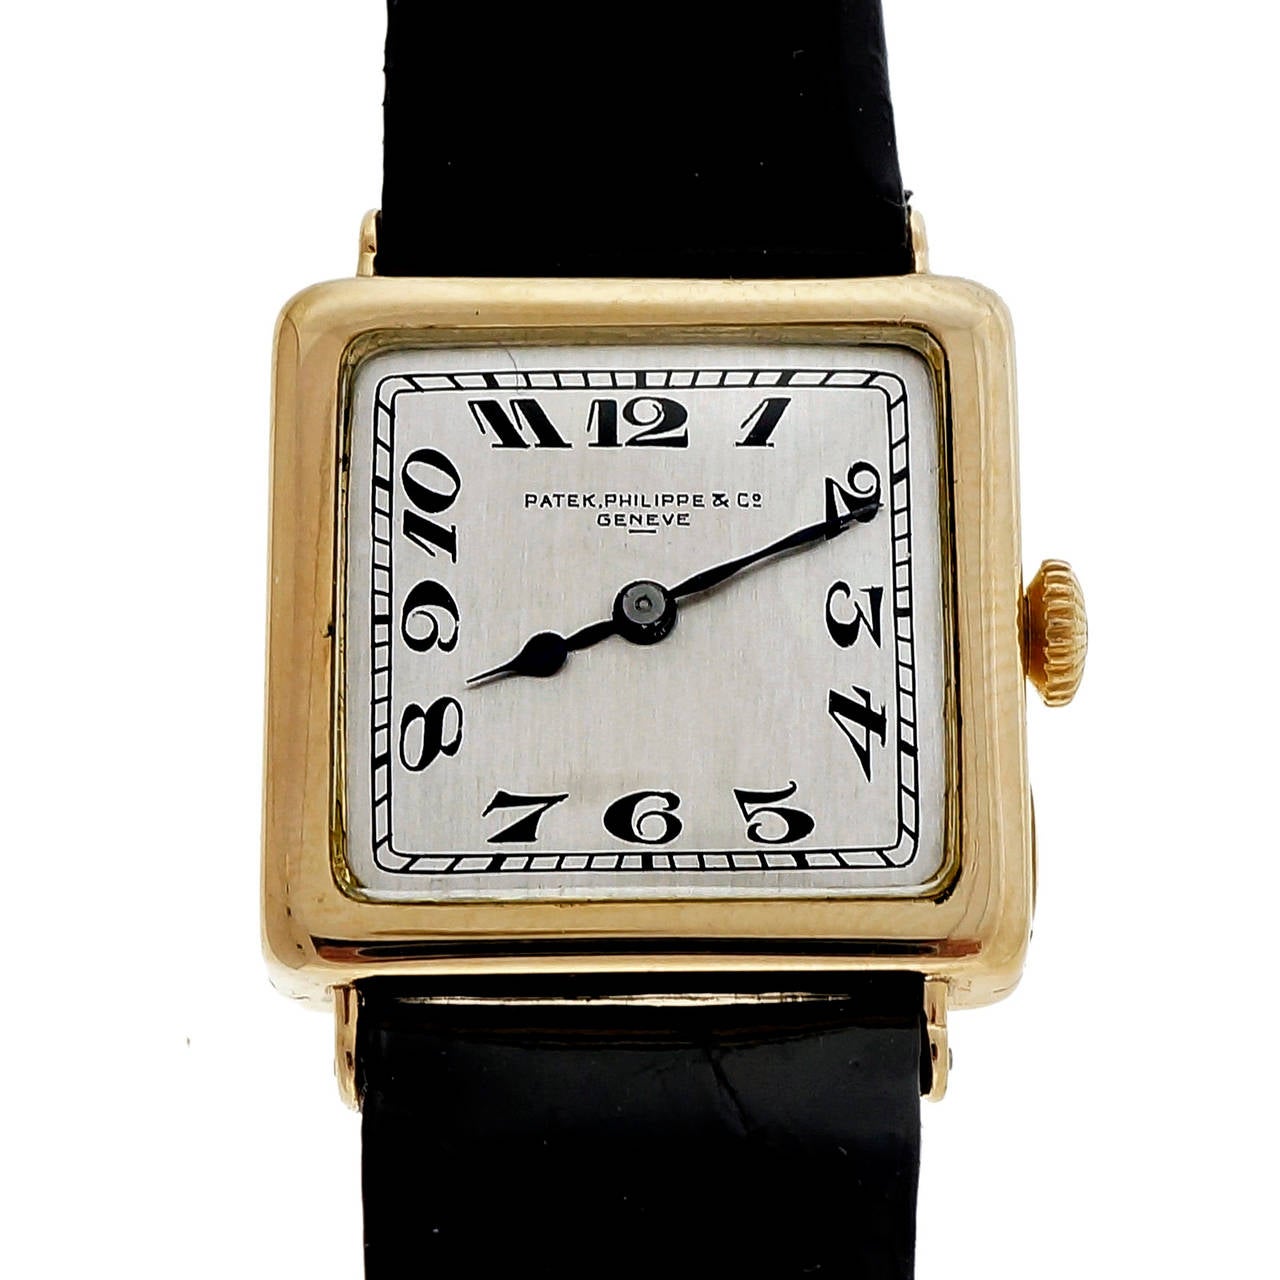 Rare 1925 Art Deco 18k yellow gold wrist watch. A beautiful example of roaring 1920’s Patek watch making. Keeps excellent time. Excellent Art Deco Patek dial. Original 18k Patek buckle. Custom made new black Alligator band. A great addition for any